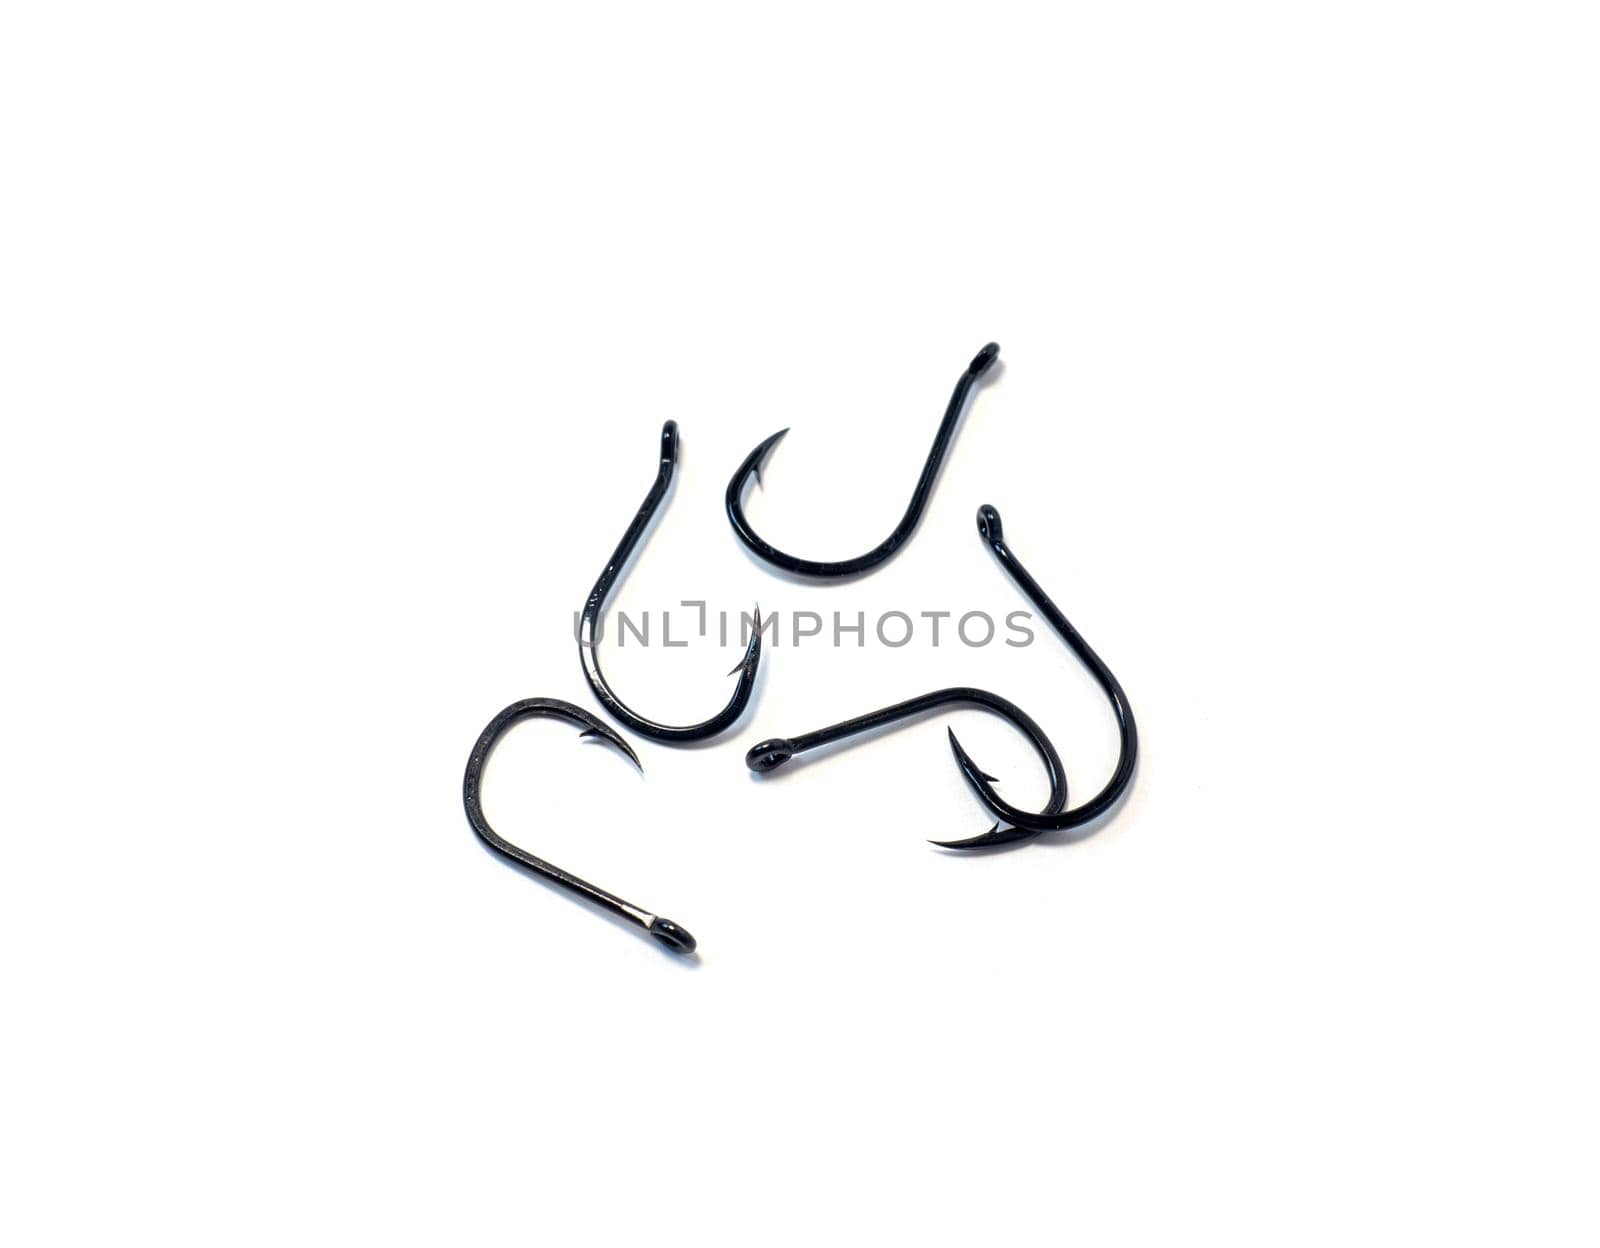 fish hooks for catching carp on a white background
